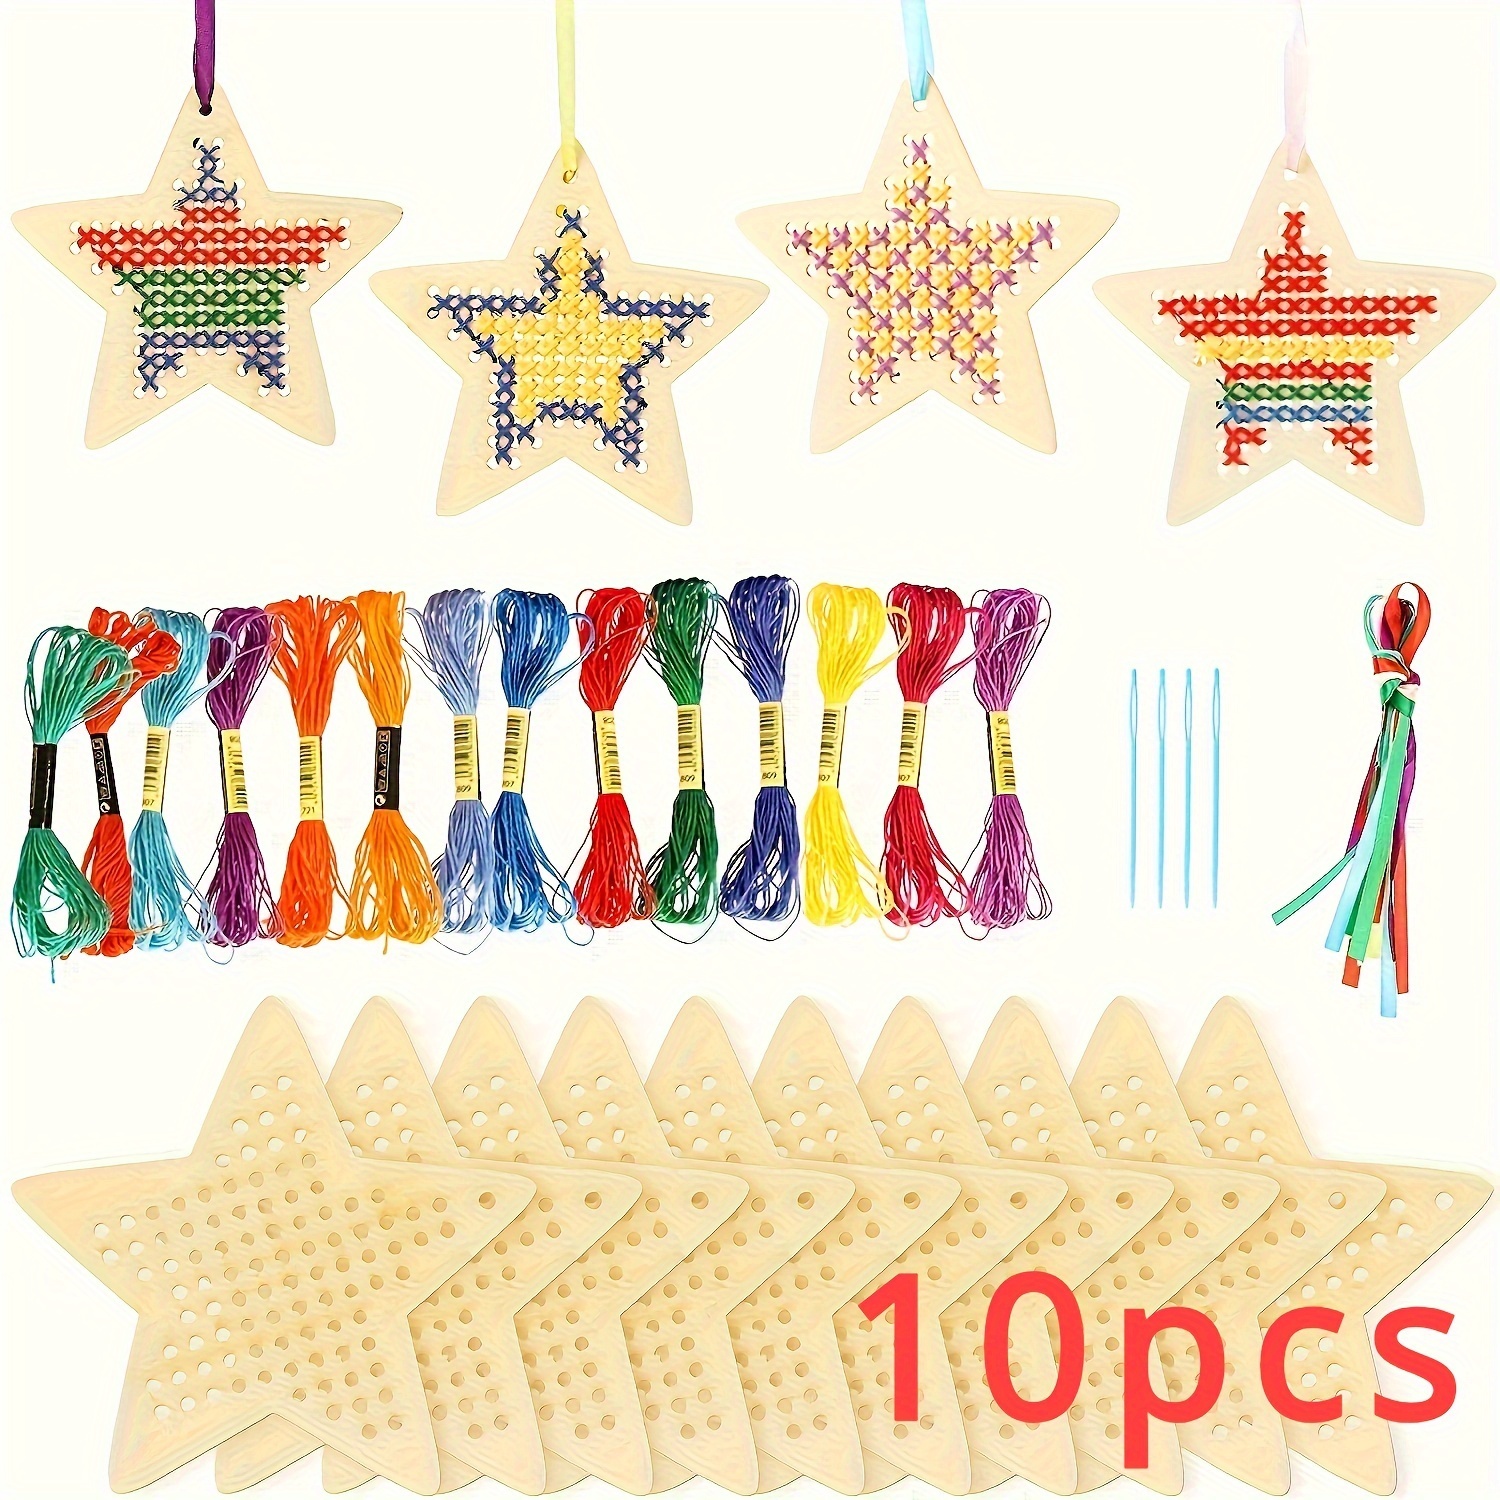 

10-piece Wooden Star Cross Stitch Kit - Diy Paint & Doodle Craft Set For Home Decor, Easter & Christmas